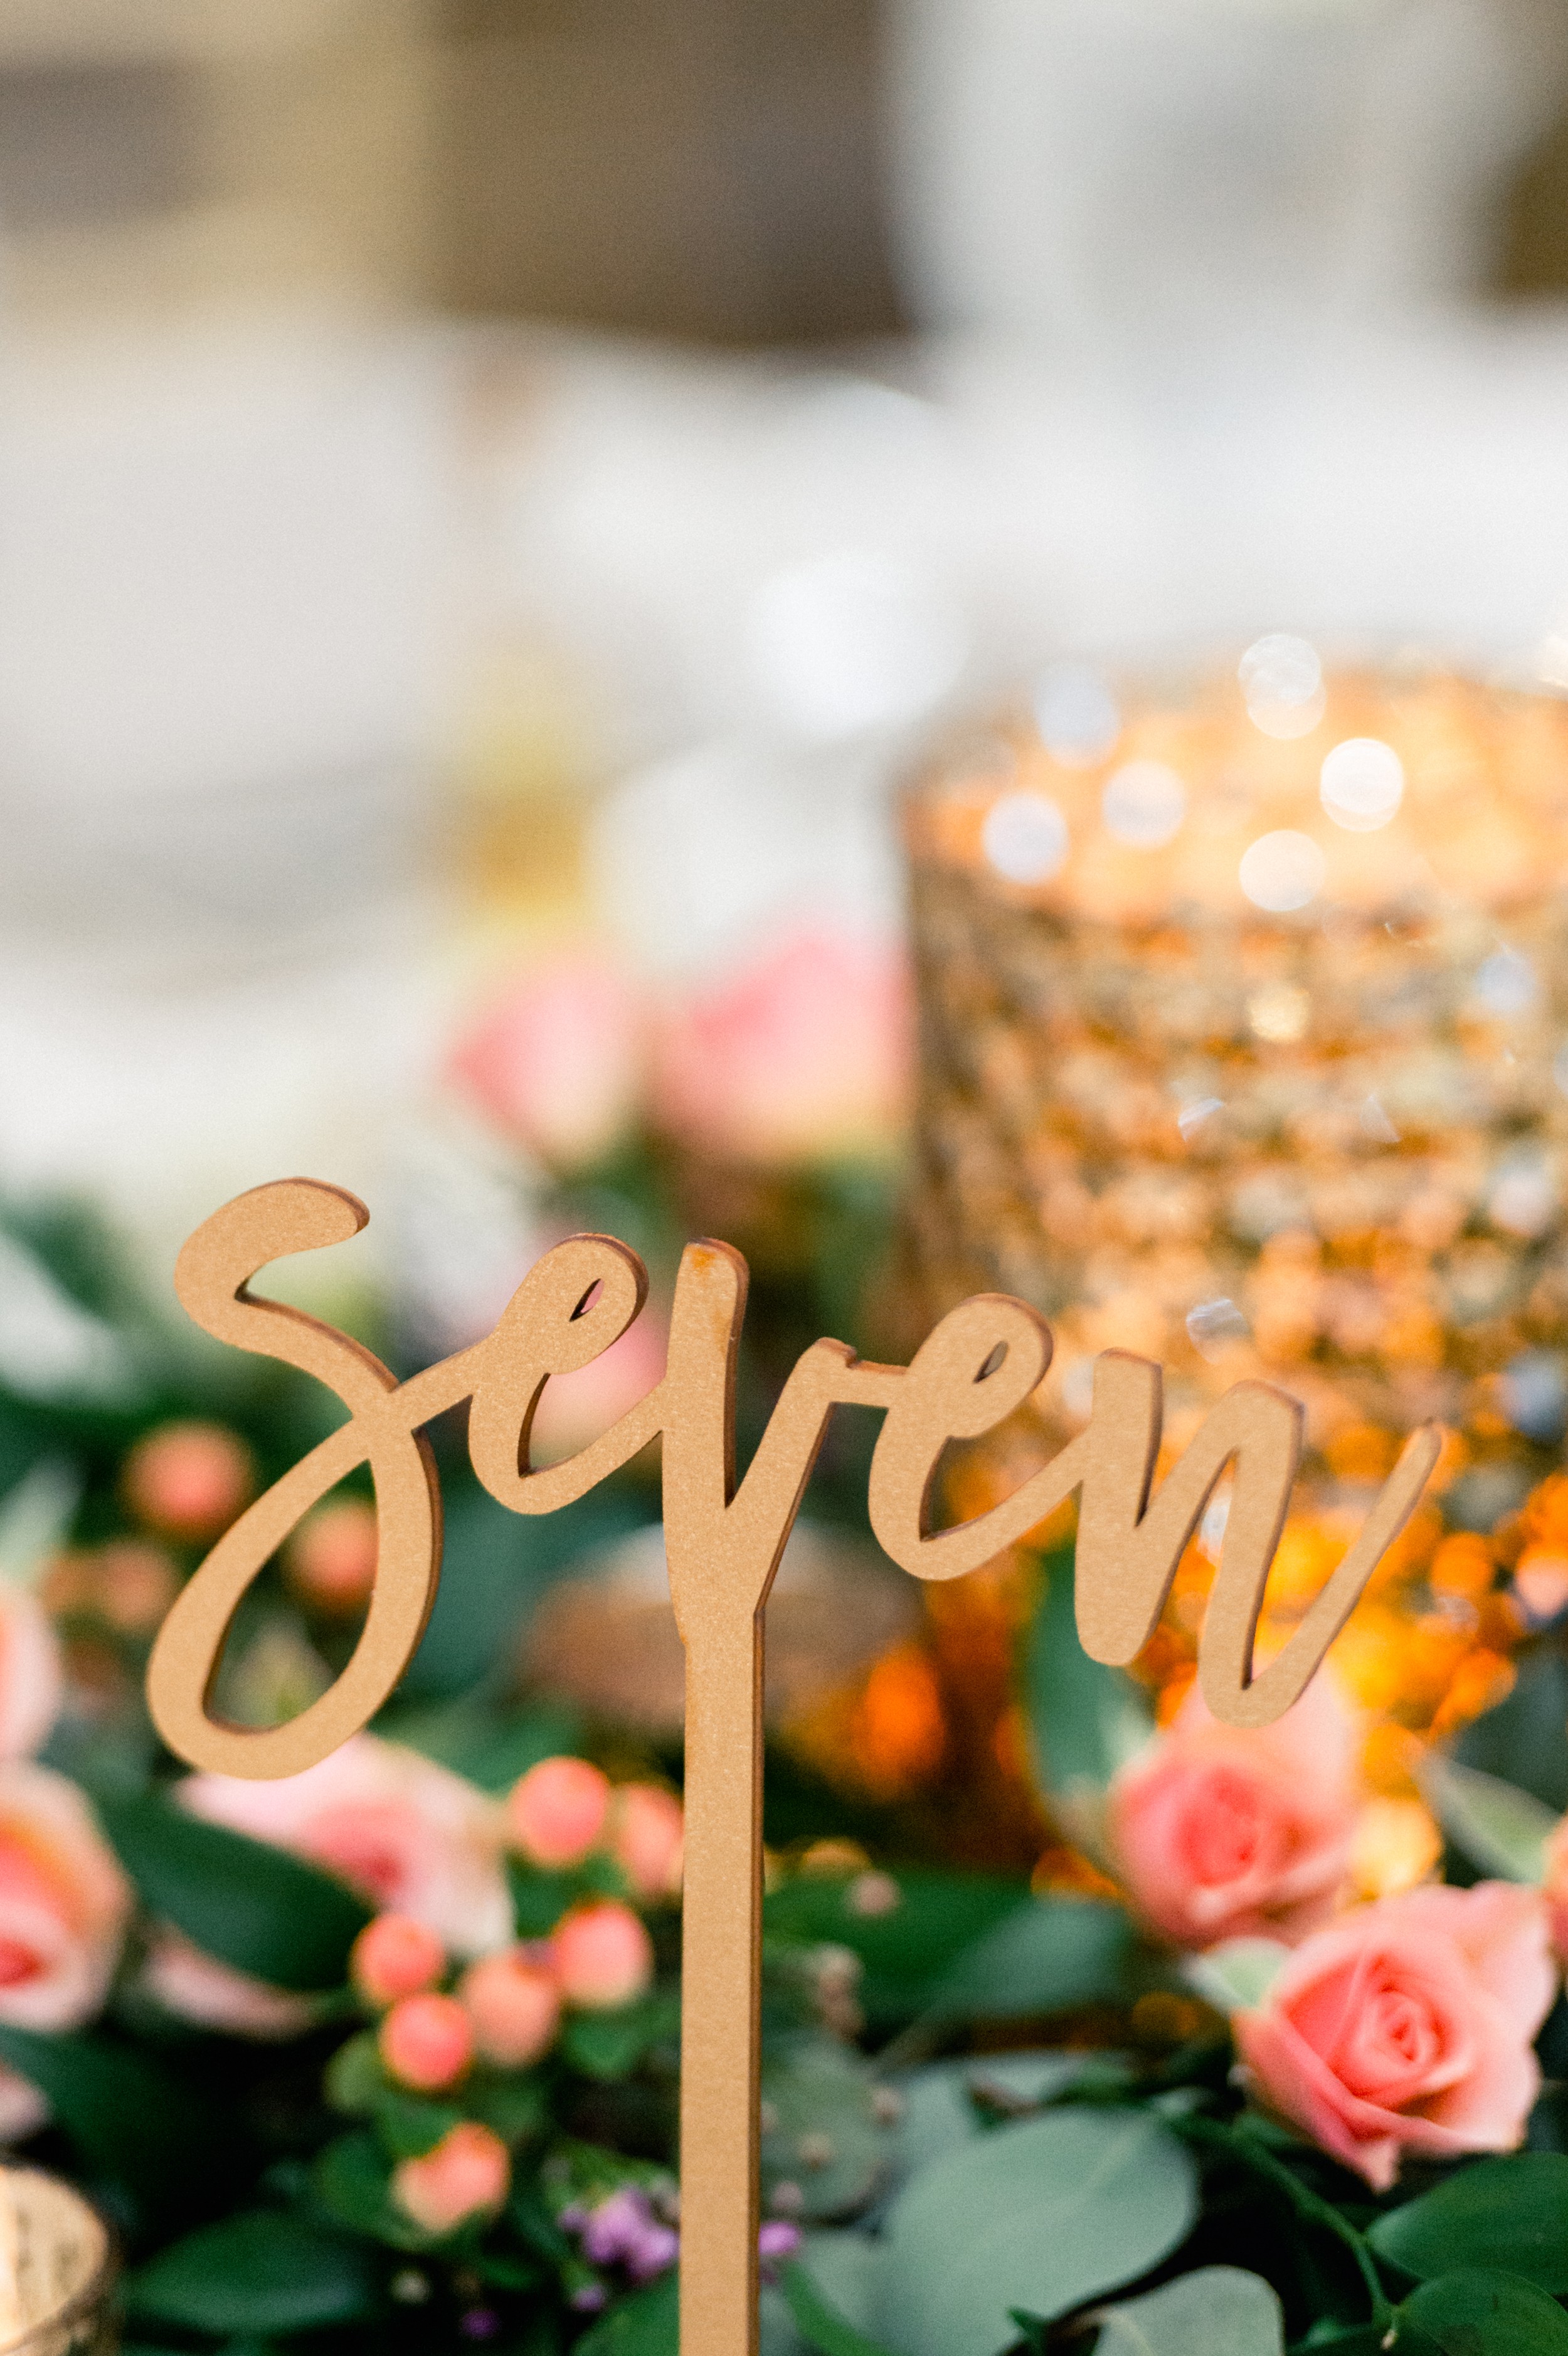 Wedding Reception Boston Wedding floral centerpiece and gold table number details